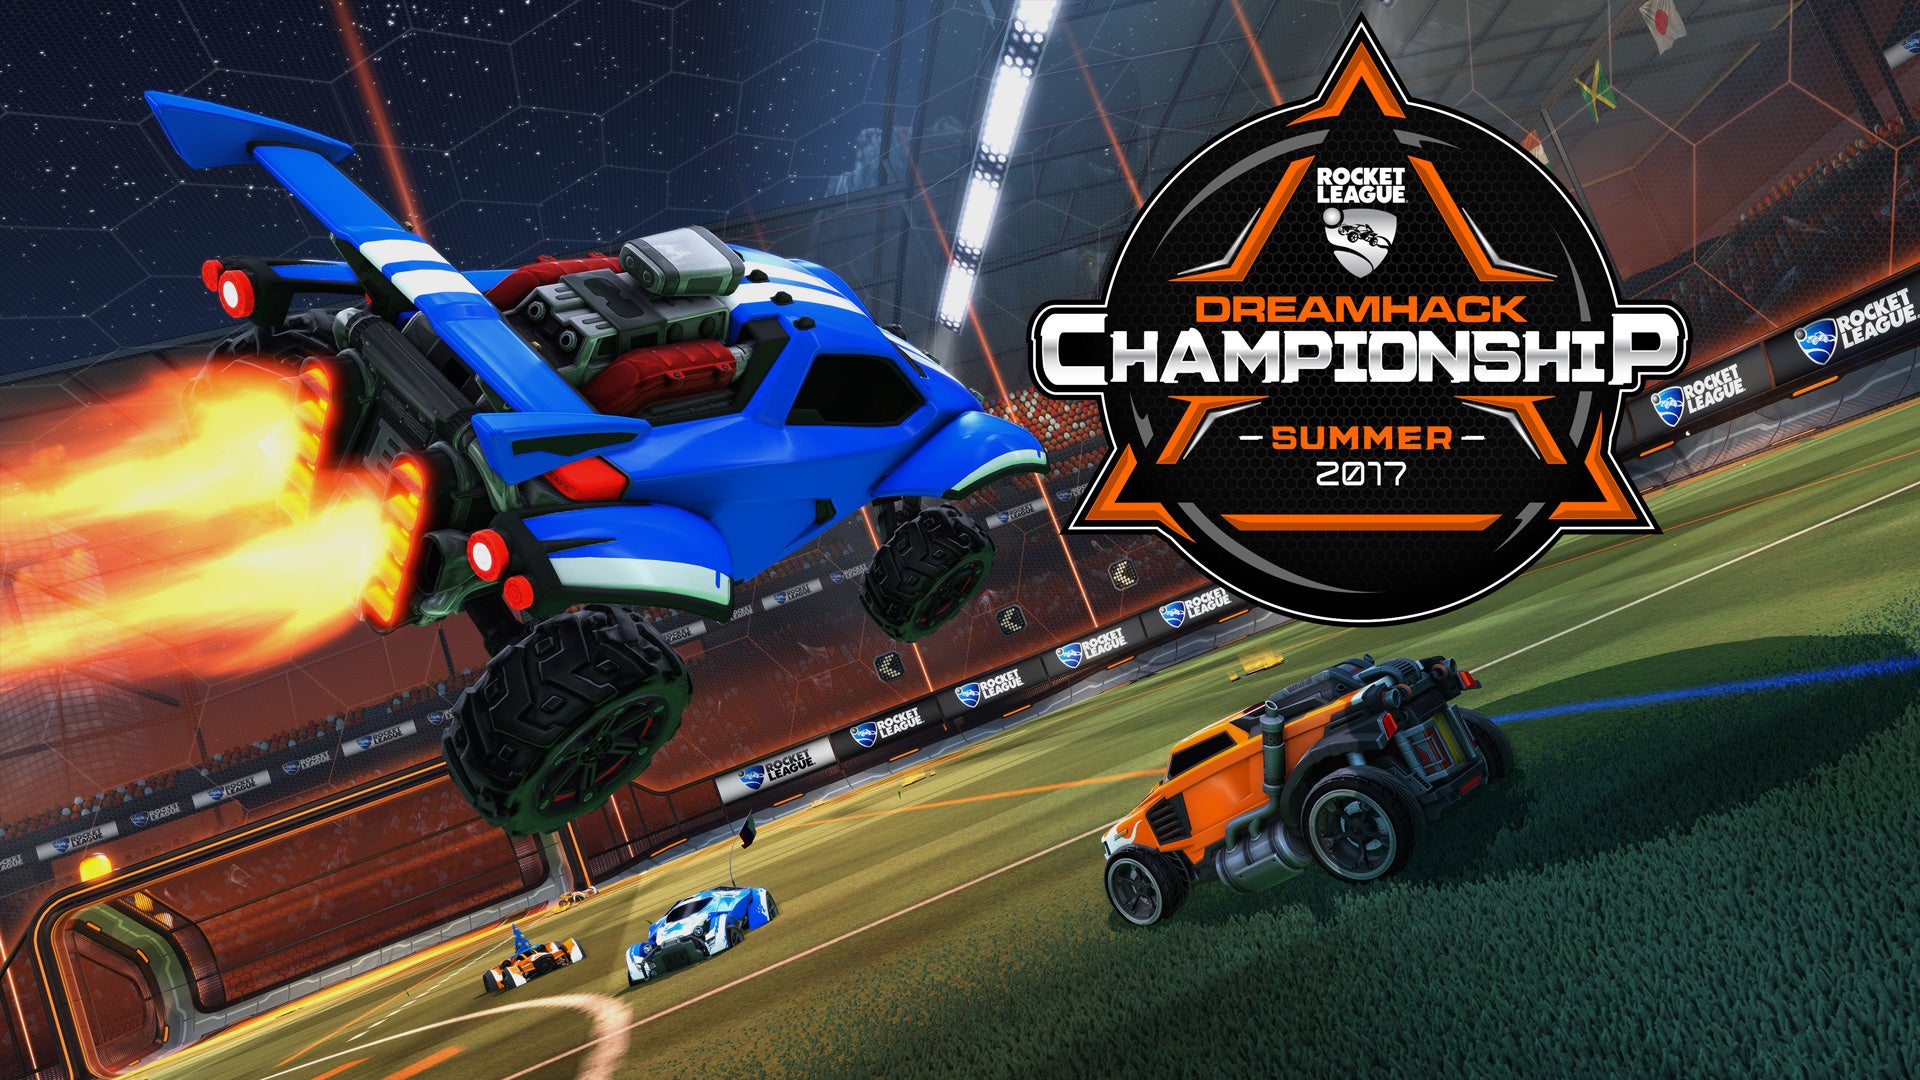 Rocket League Brings $100,000 in Prize Pools to DreamHack This Summer Image